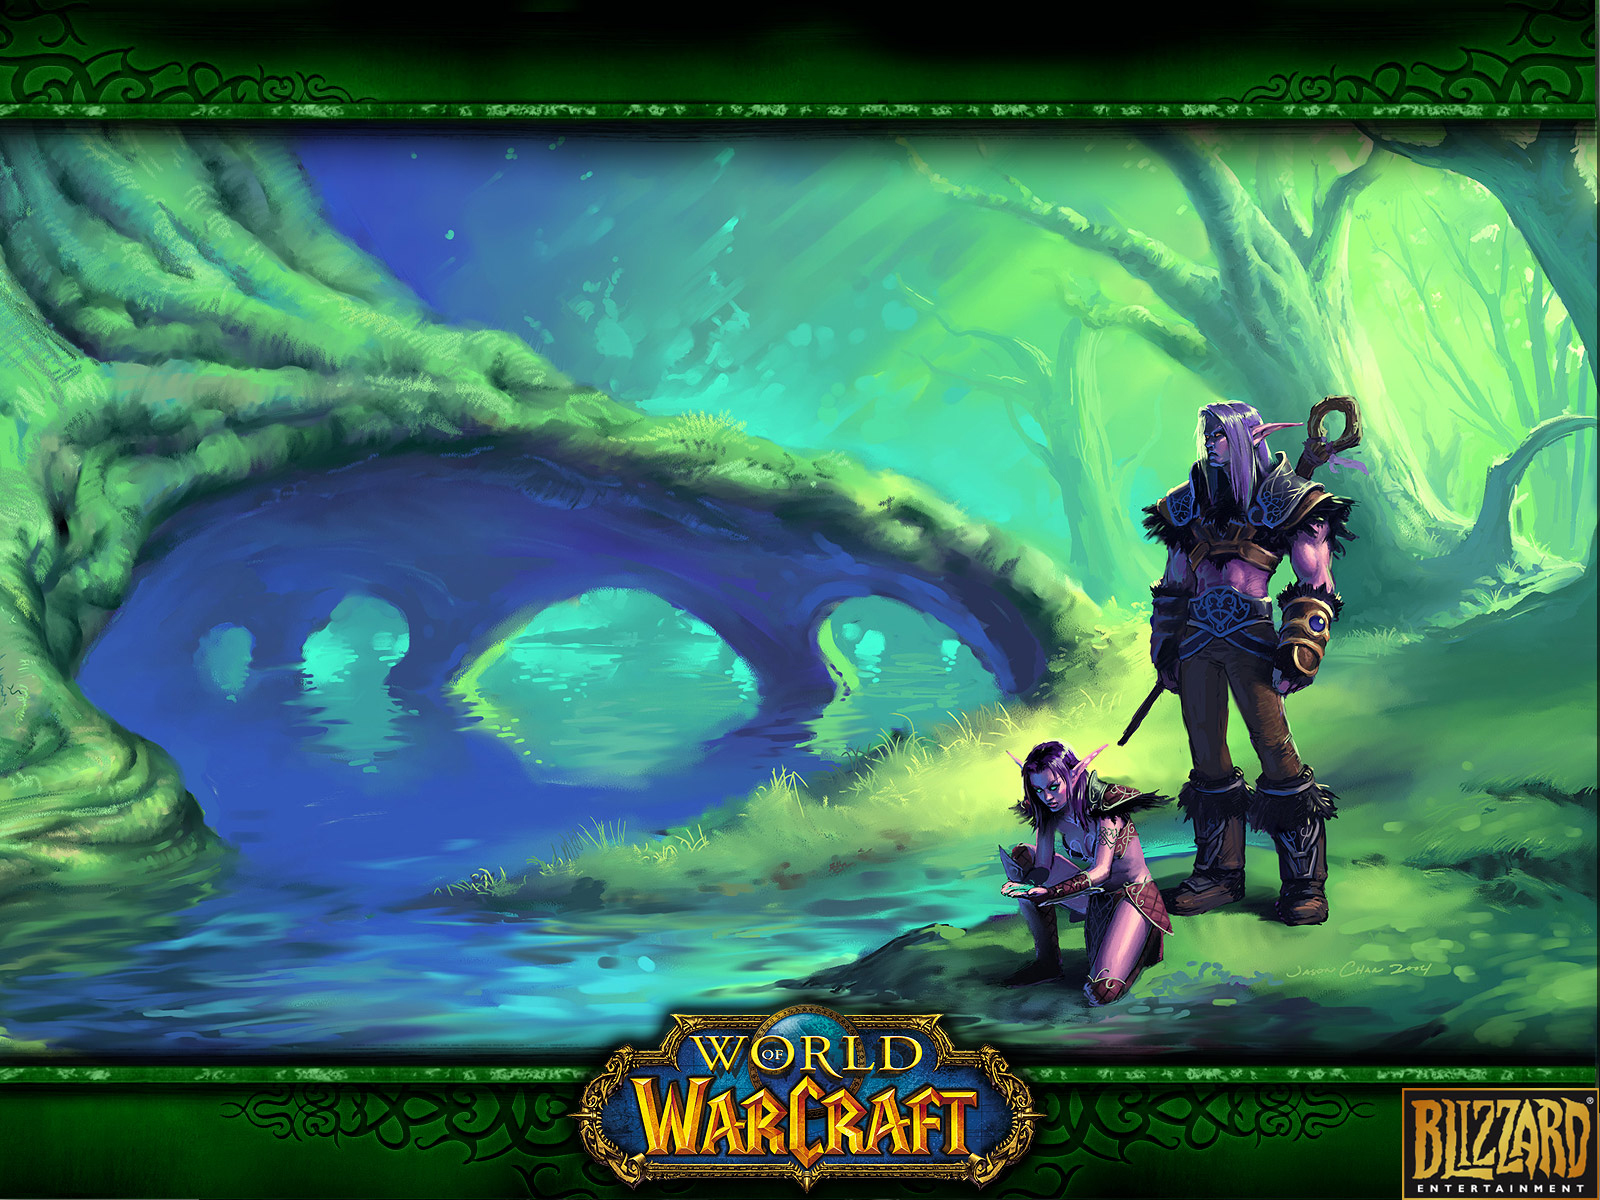 World of Warcraft 3 wallpaper from World of Warcraft wallpapers